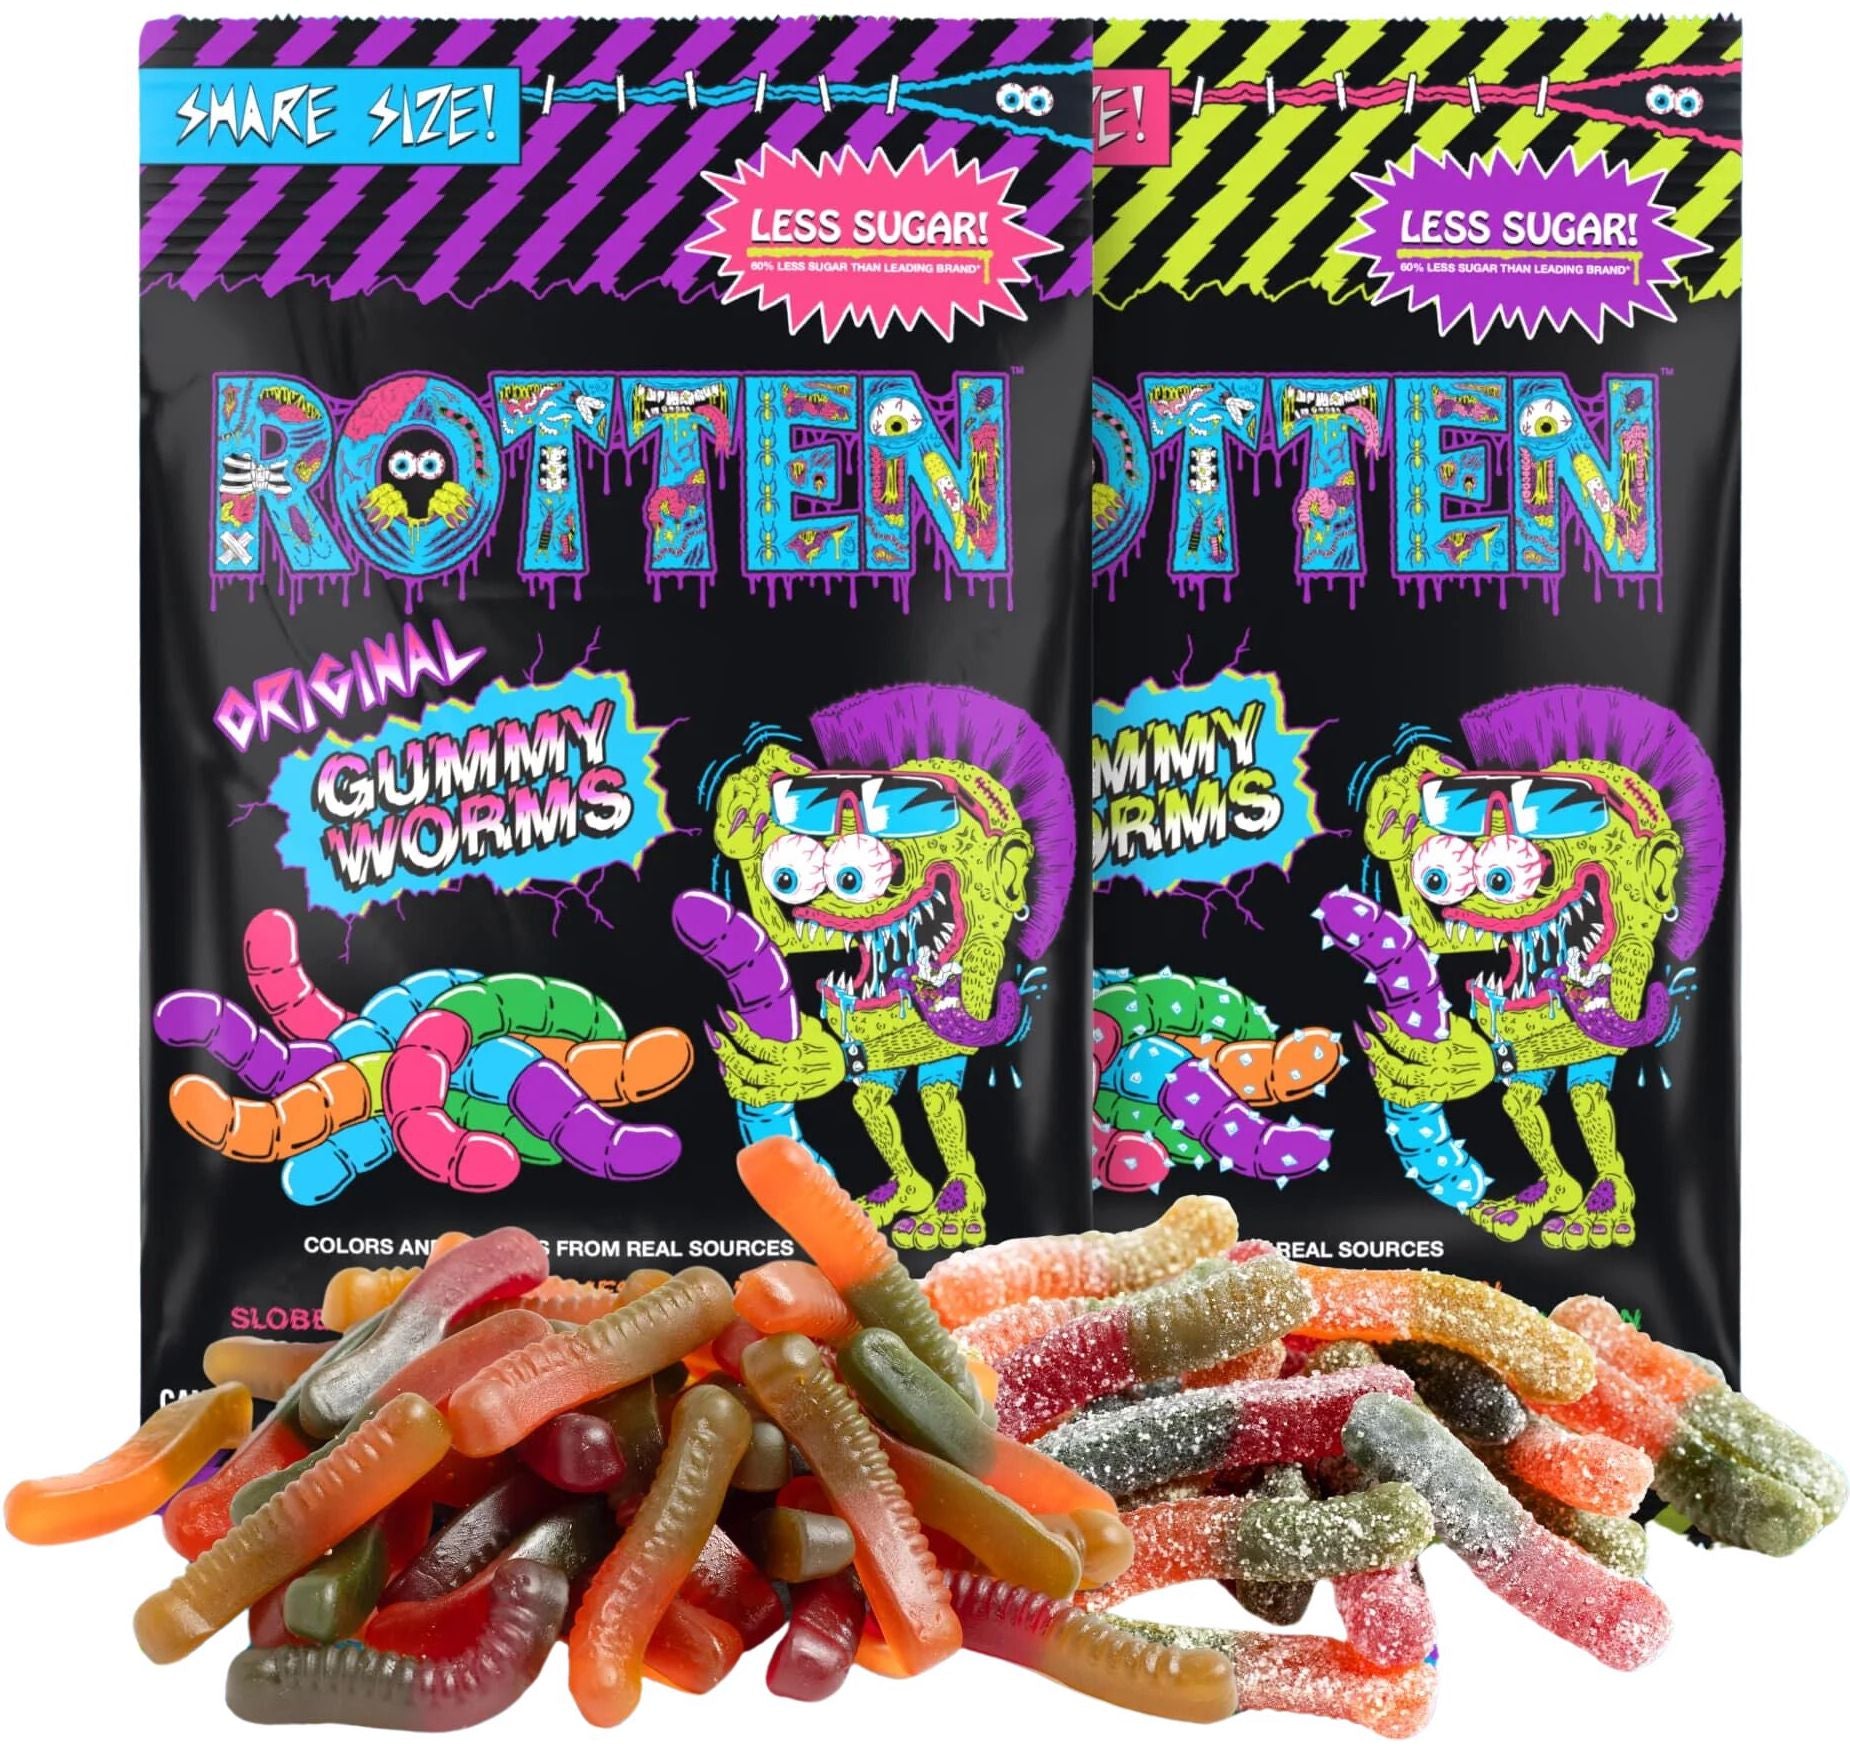 A colorful package of gummy worms with a cartoonish zombie character and actual gummy worms in front.